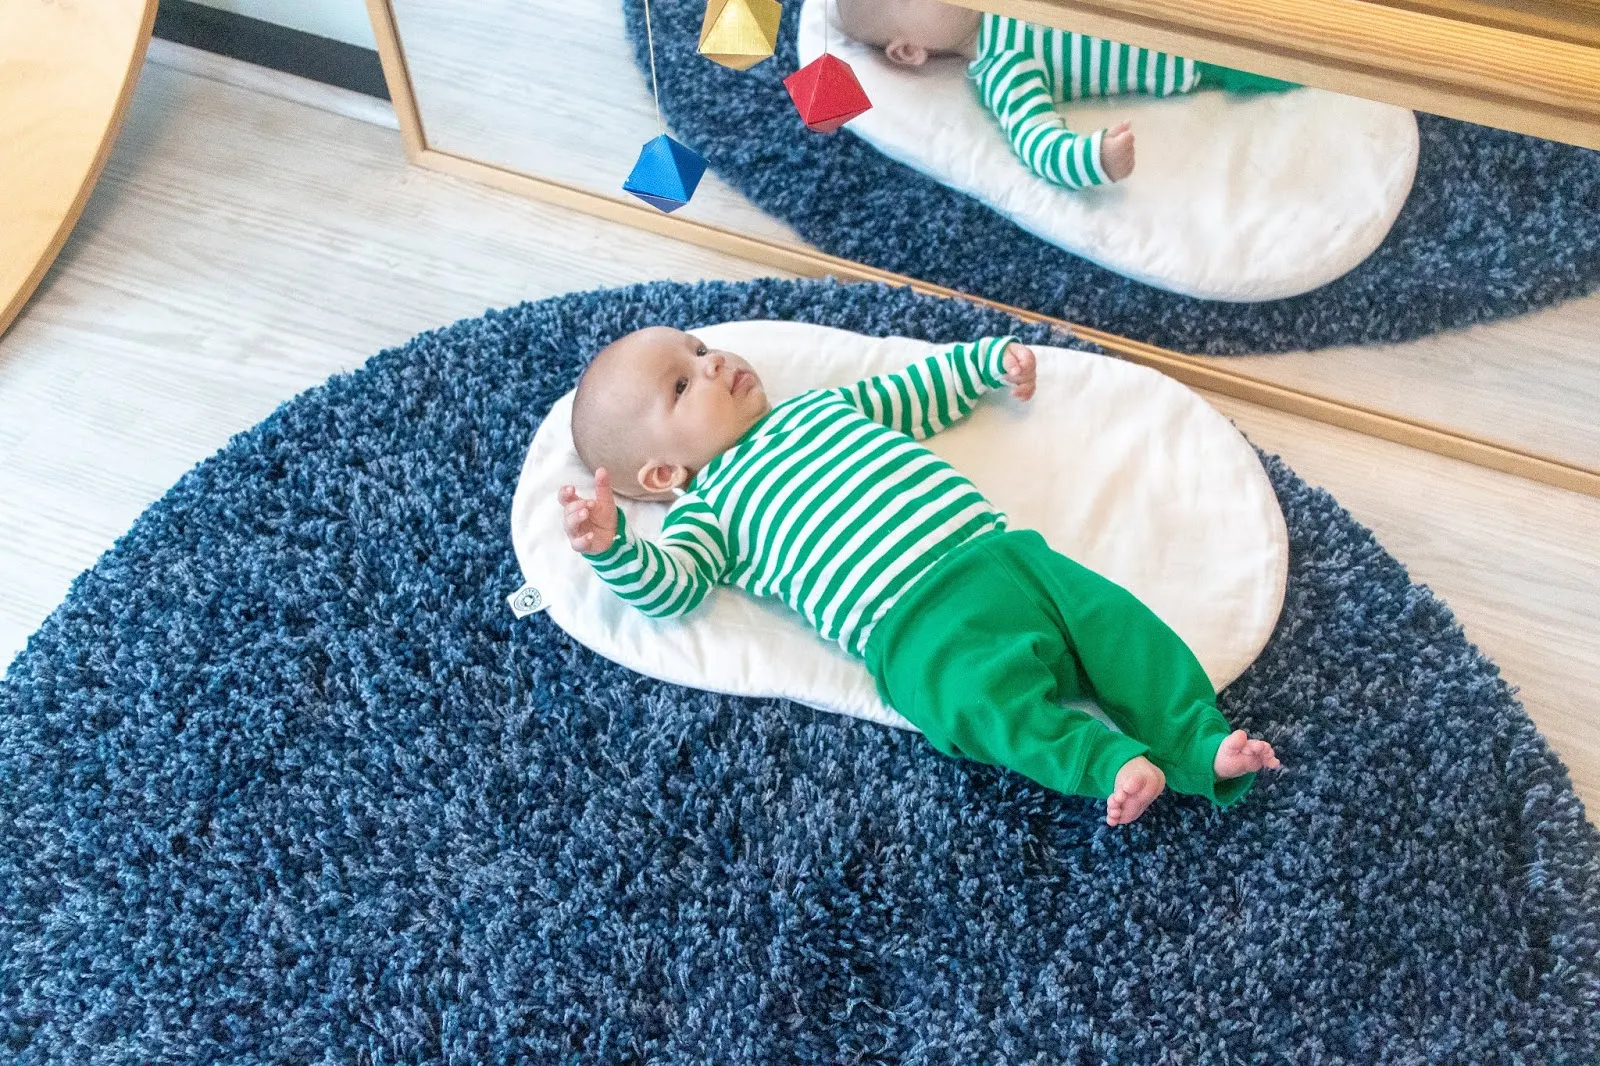 Notes on observing a newborn - practical tips for observing a baby from a Montessori perspective